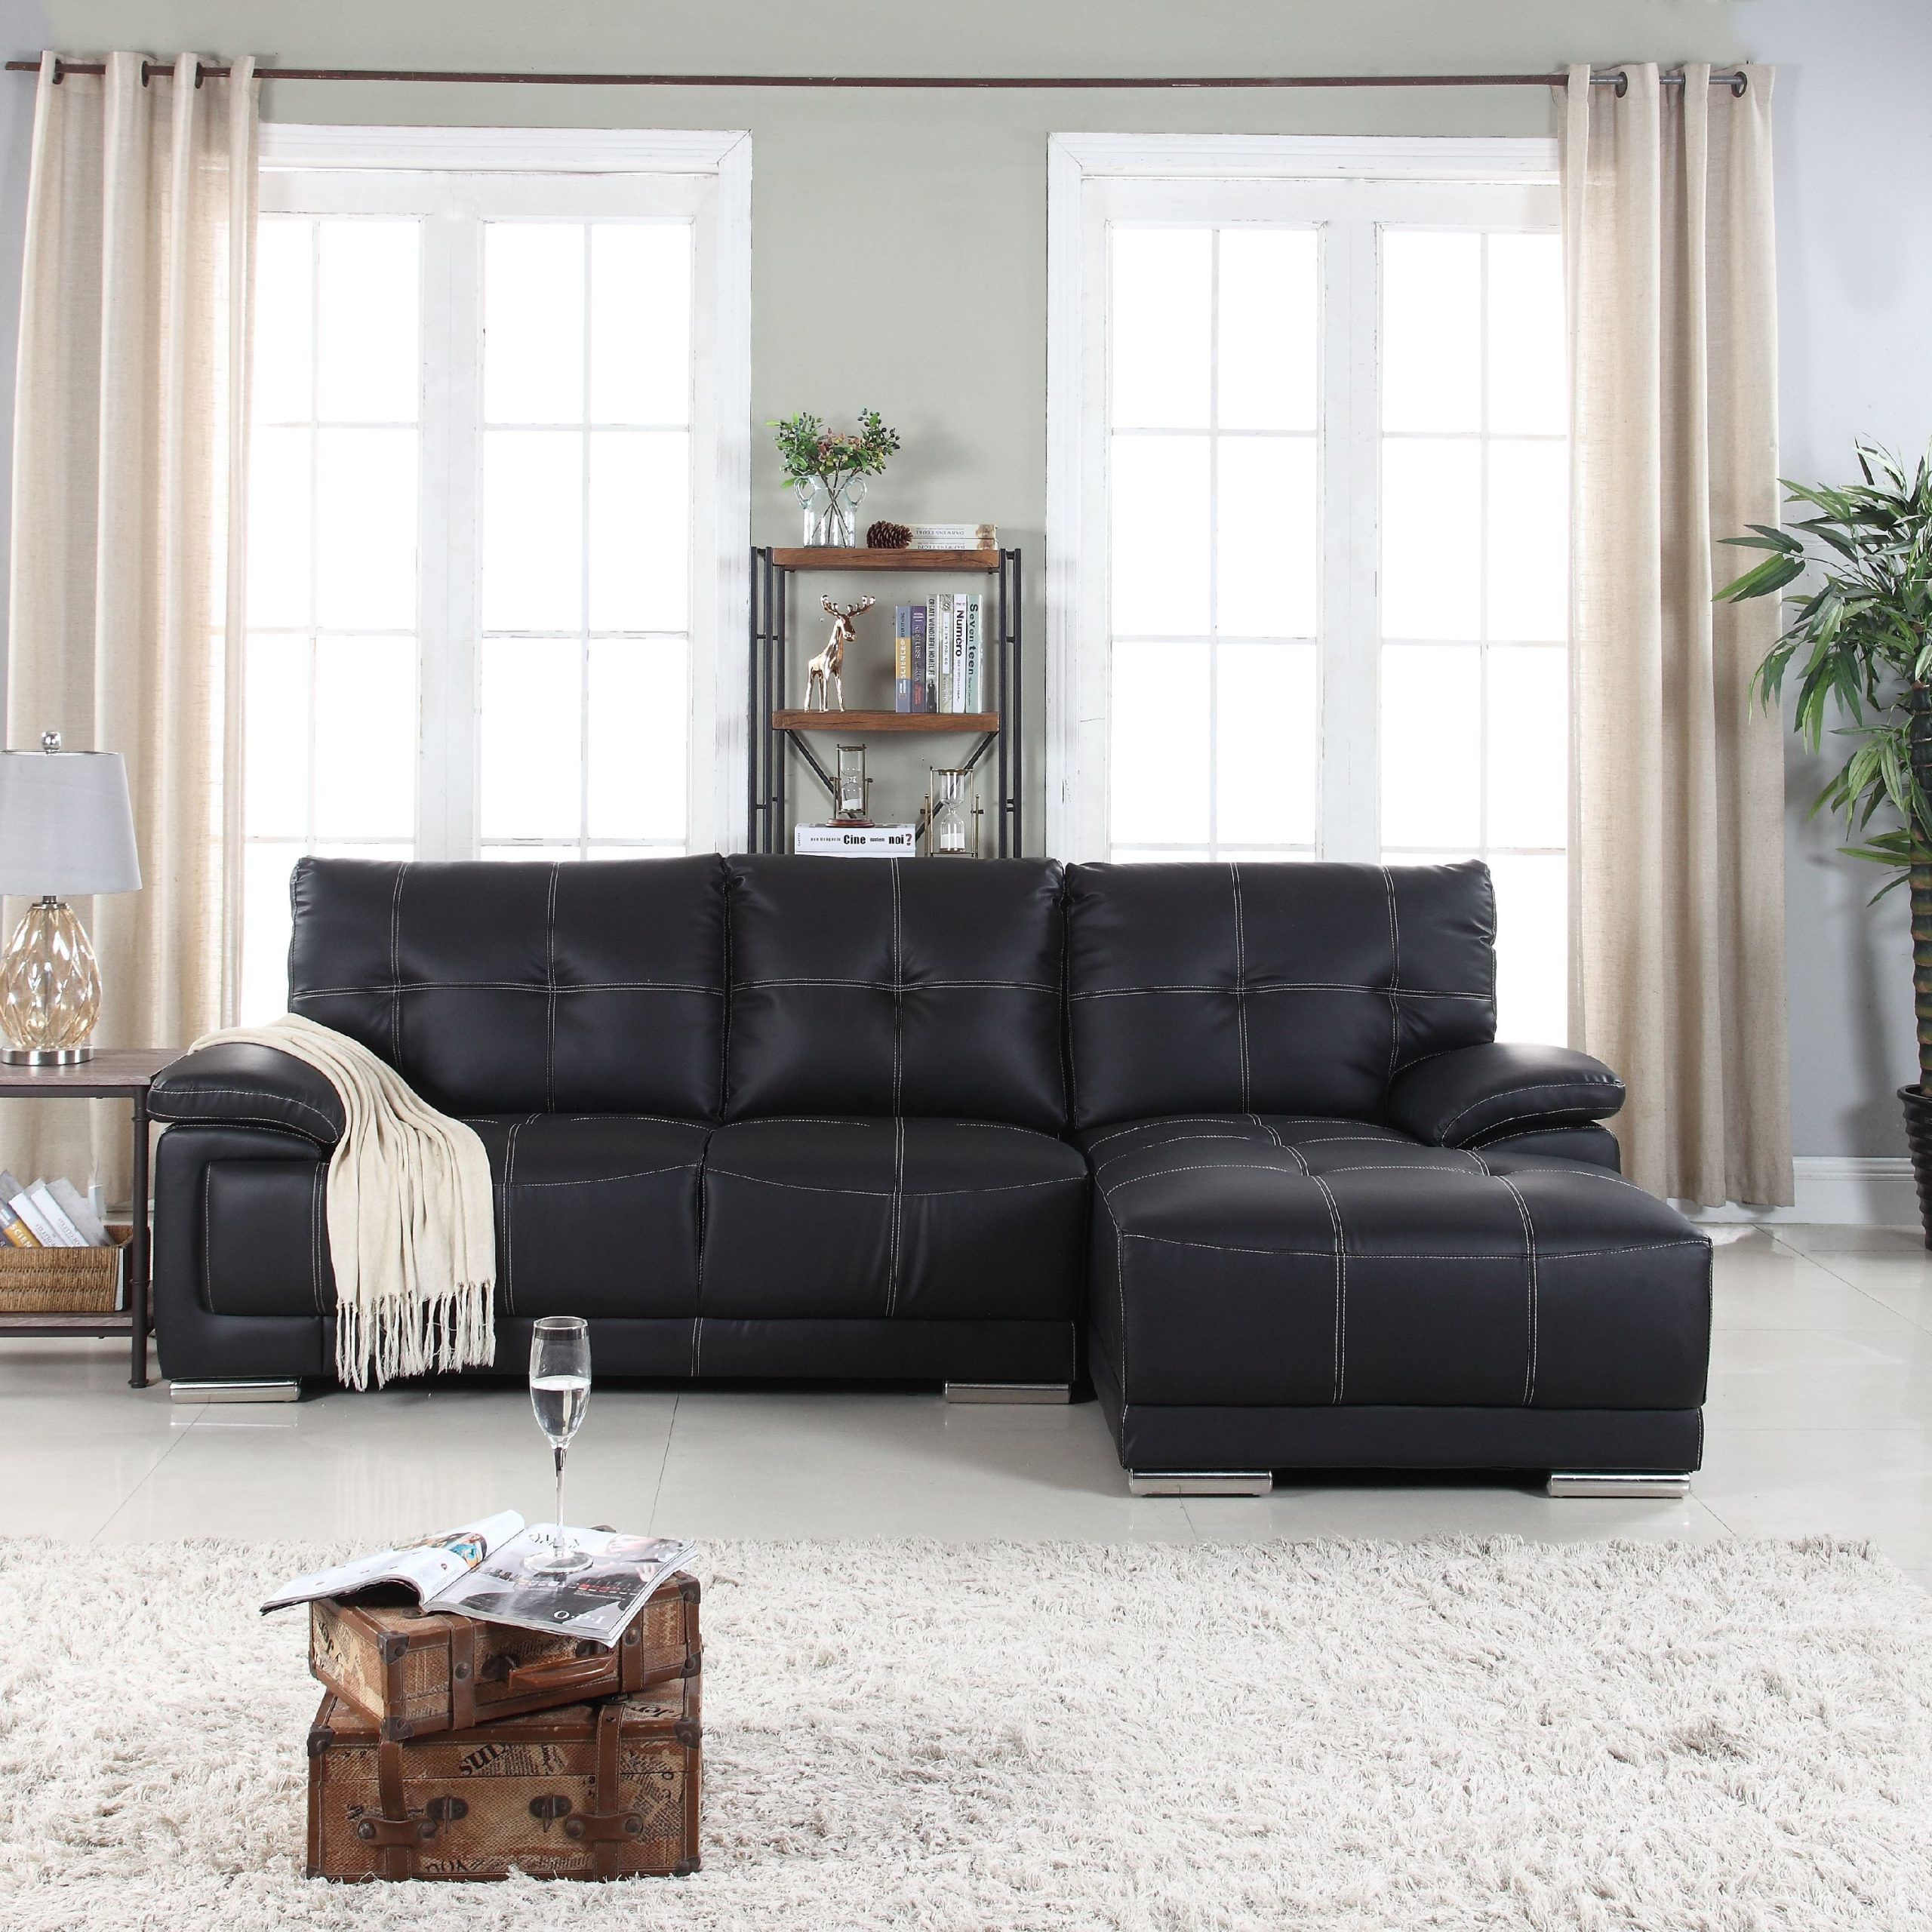 Classic Tufted Faux Leather Sectional Sofa – Walmart For Faux Leather Sectional Sofa Sets (Gallery 17 of 21)